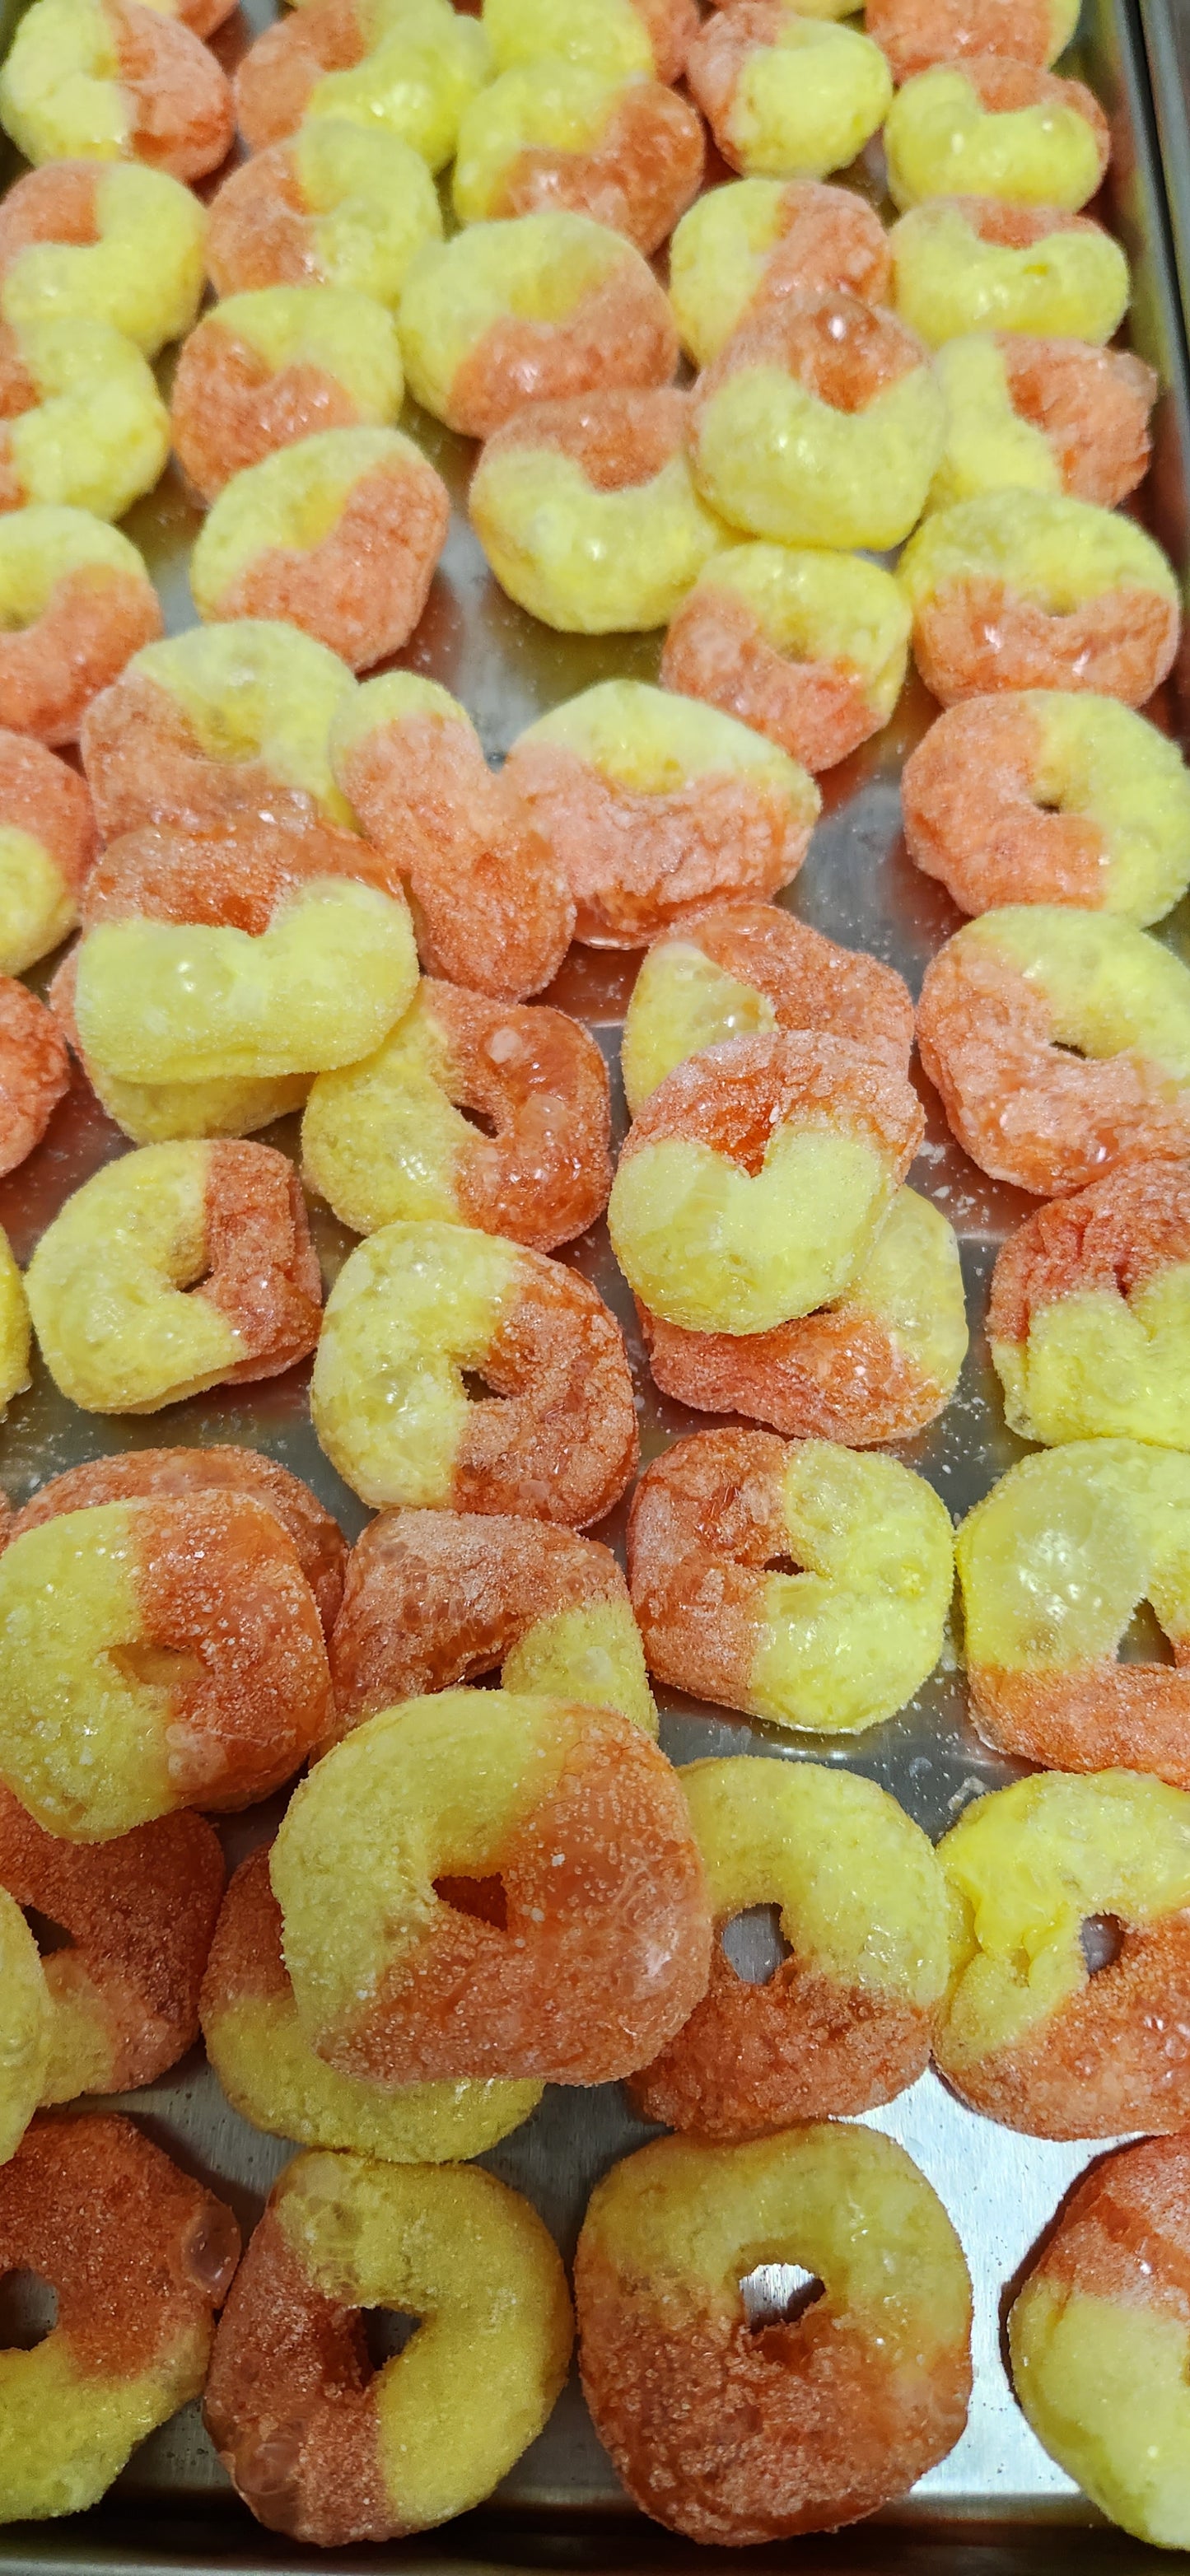 Peach Rings - Freeze Dried Candy